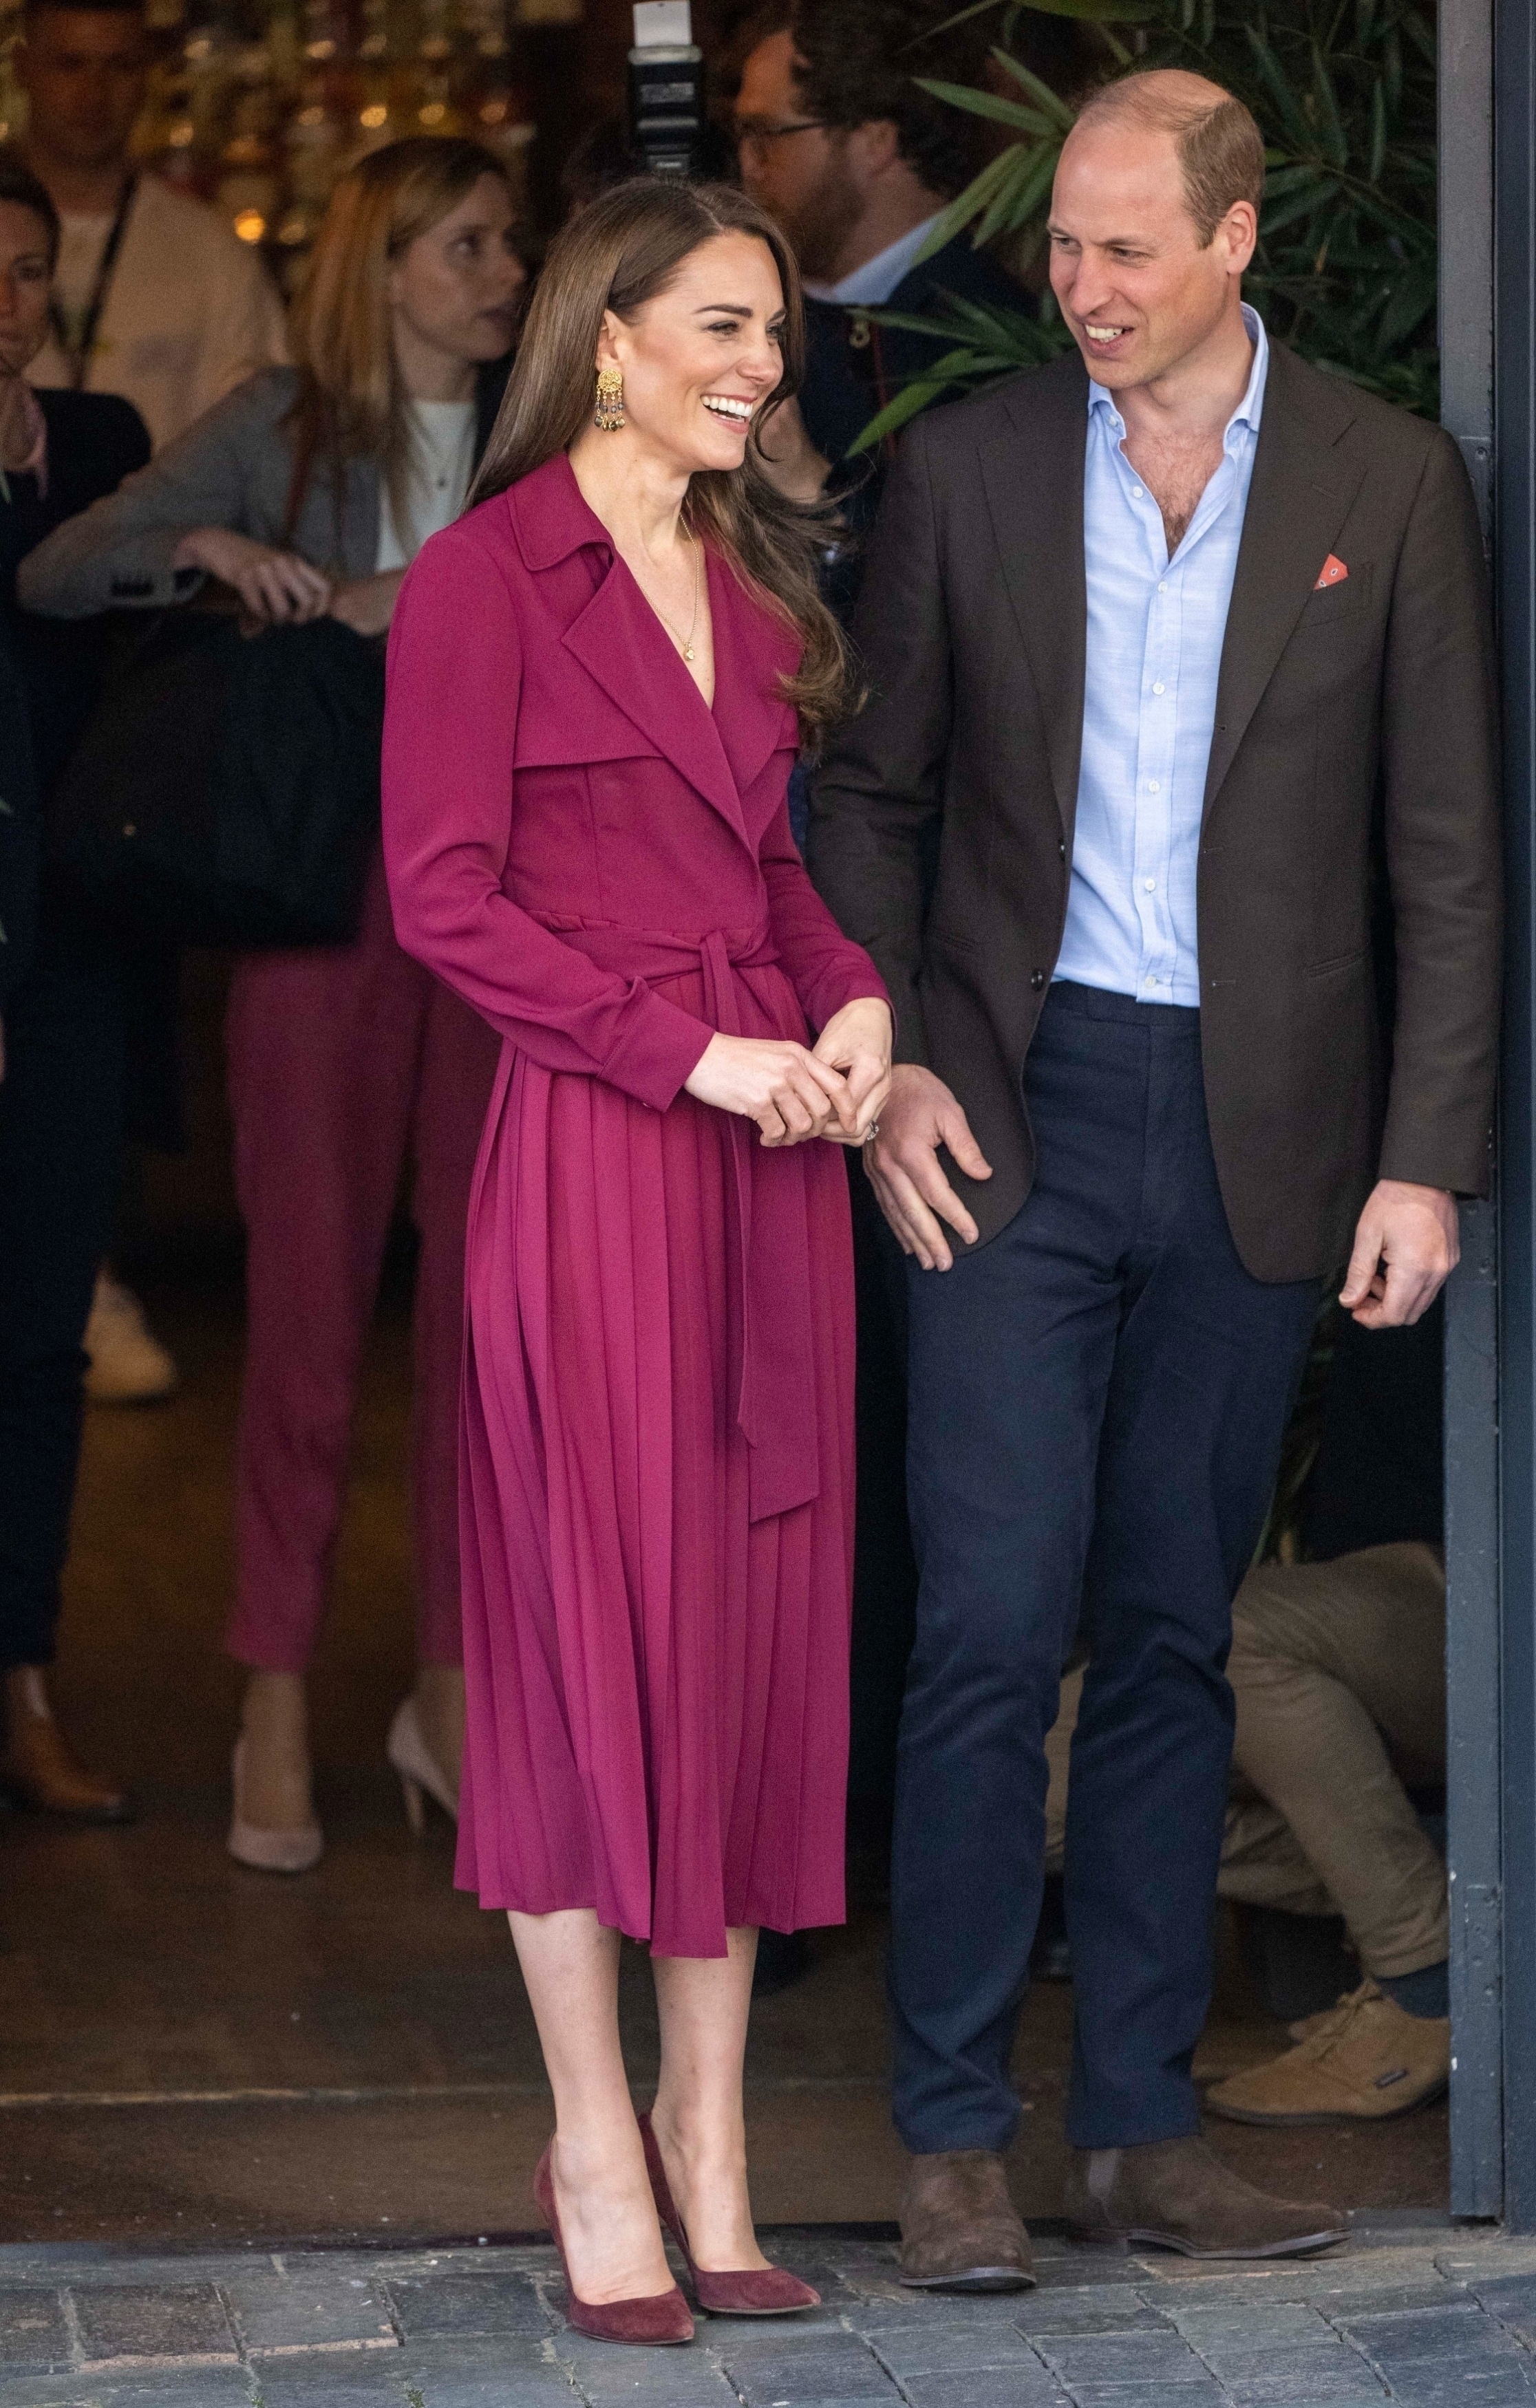 How to dress like the Duchess of wales - get Kate Middleton's style